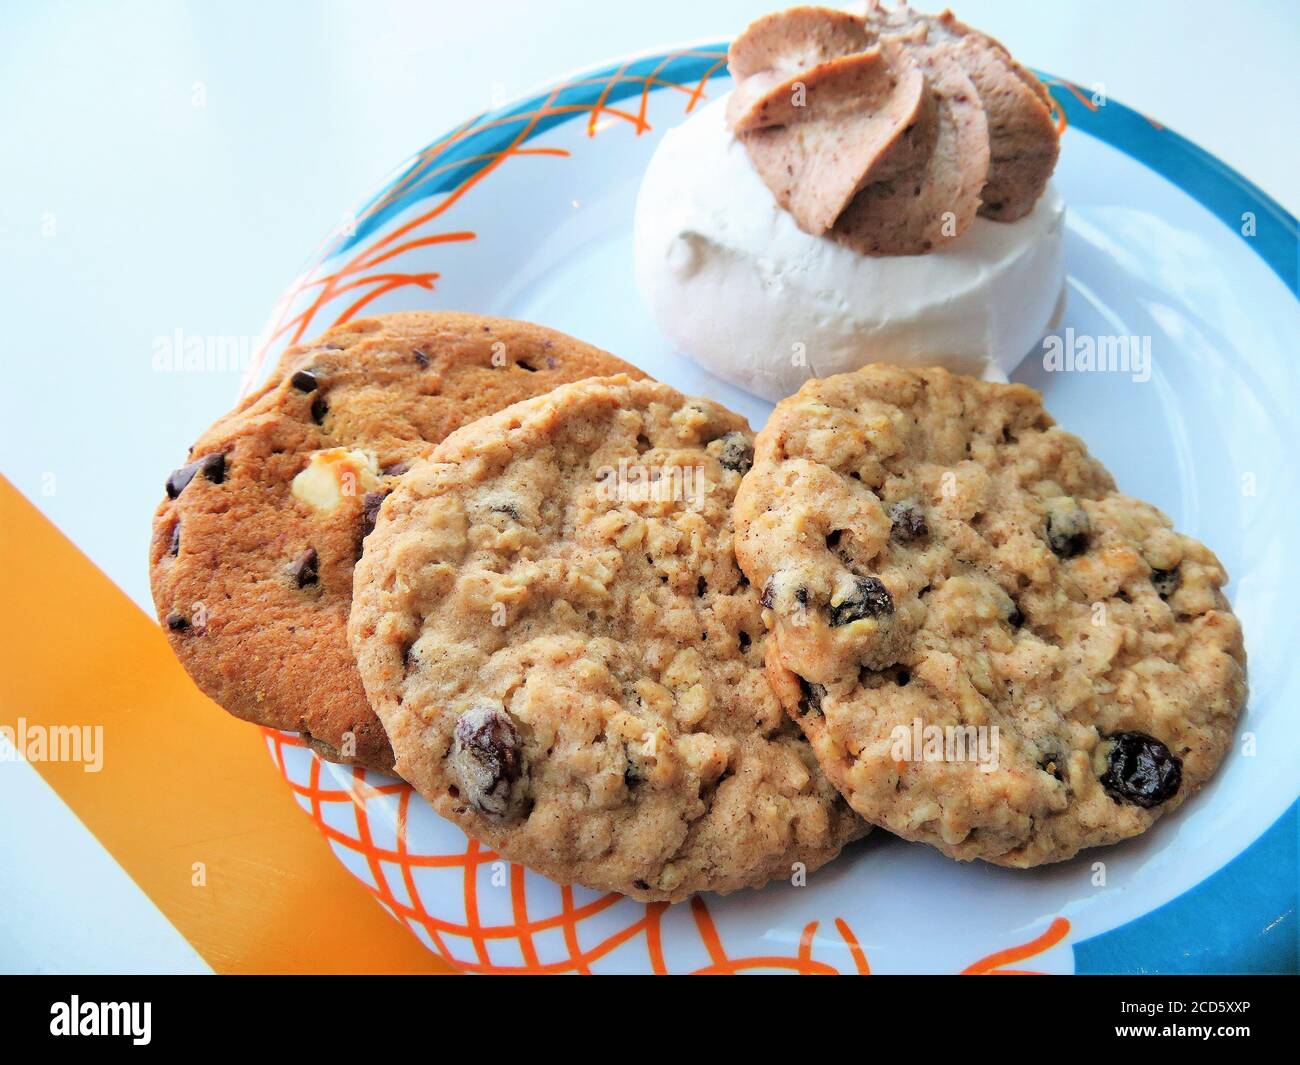 Cookies on a plate Stock Photo